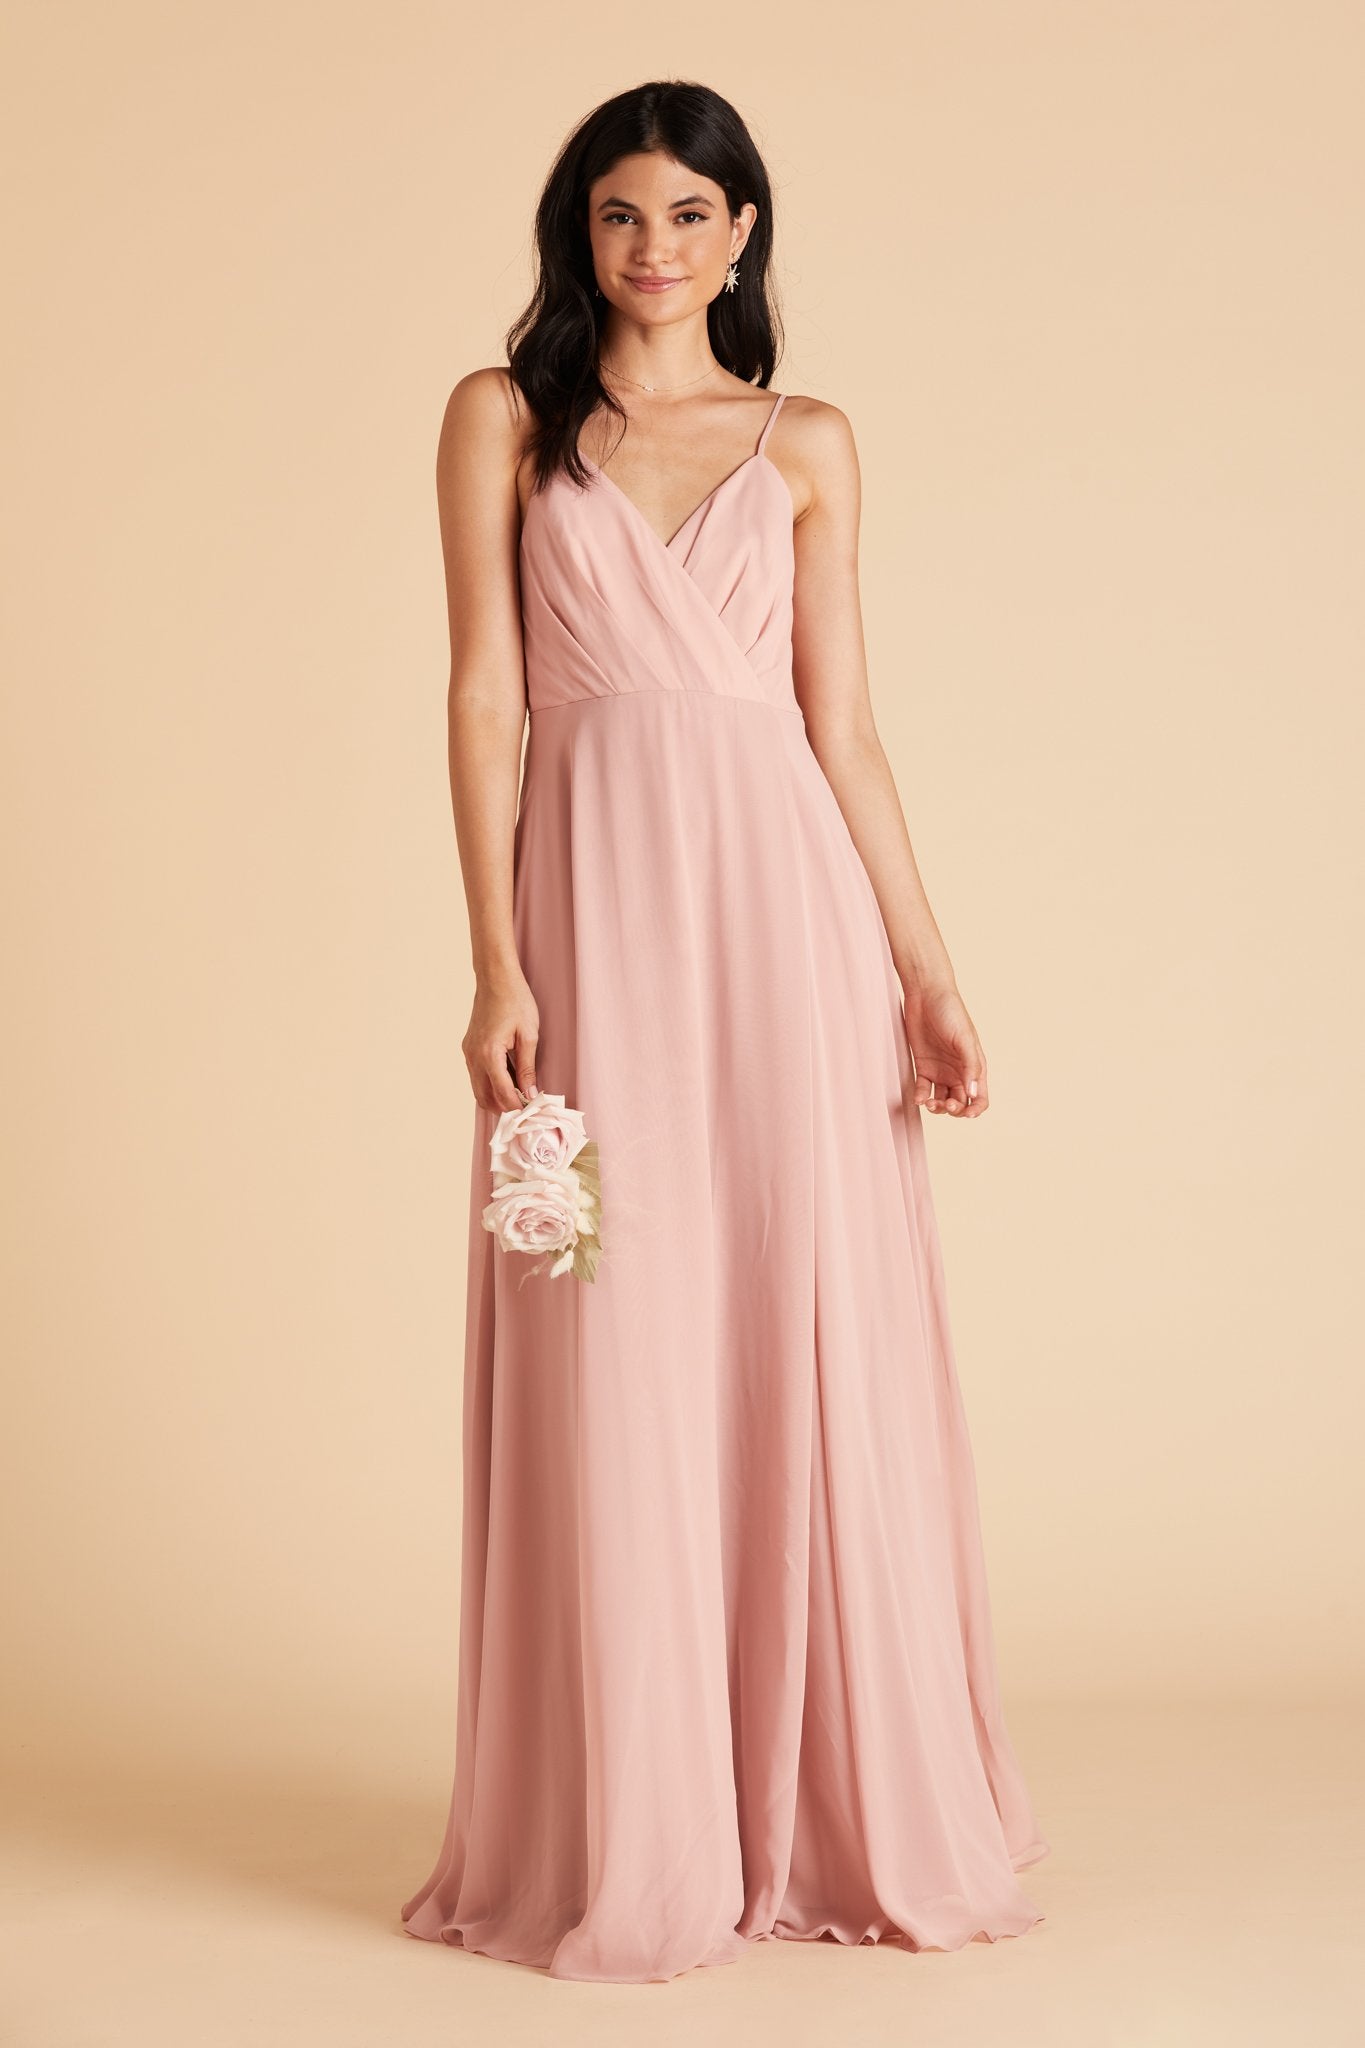 Front view of the Kira Dress in dusty rose chiffon worn by a slender model with a light skin tone. 